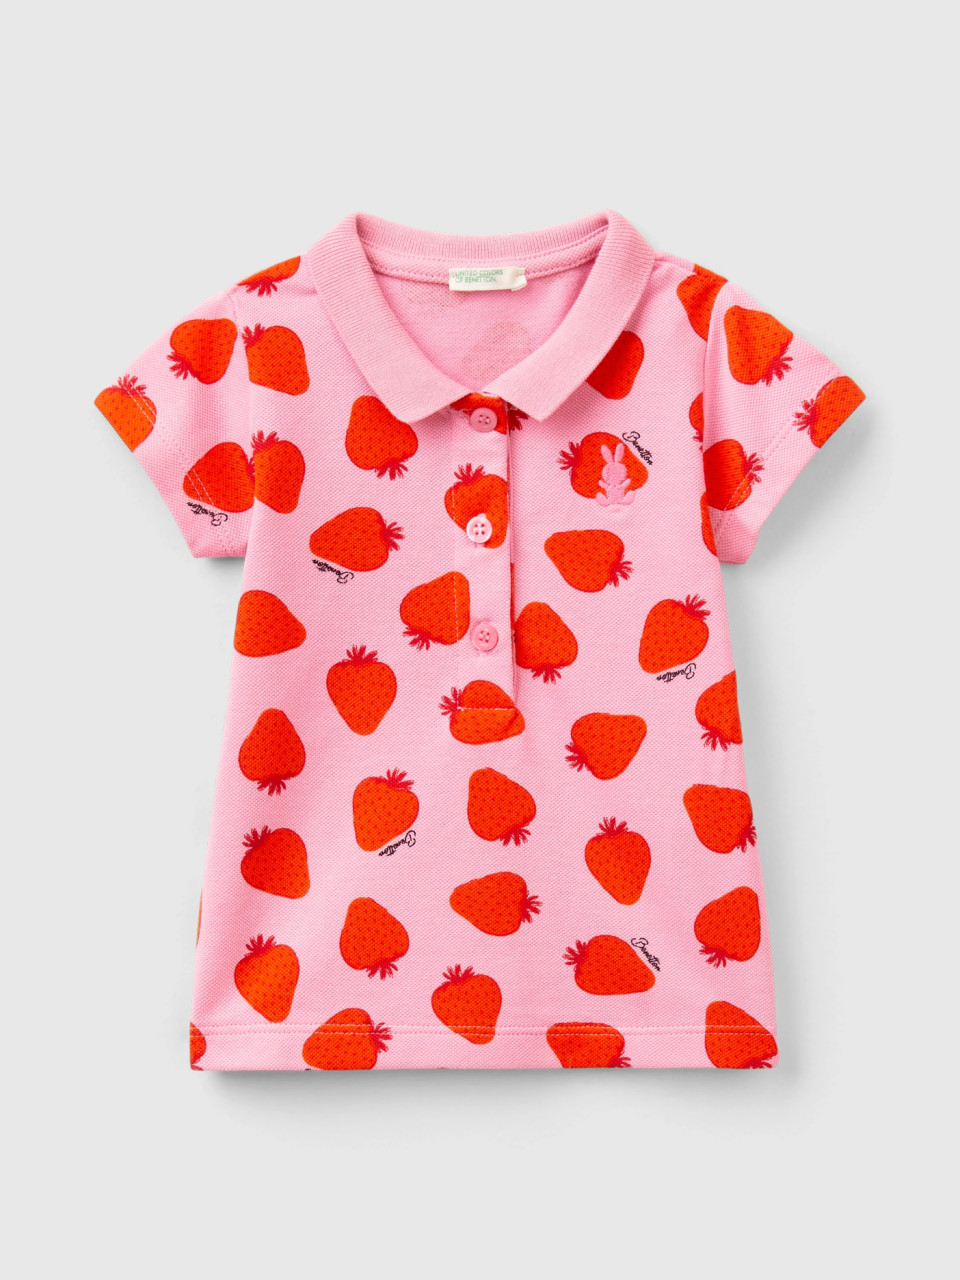 Benetton, Polo Shirt With Strawberry Pattern, Pink, Kids